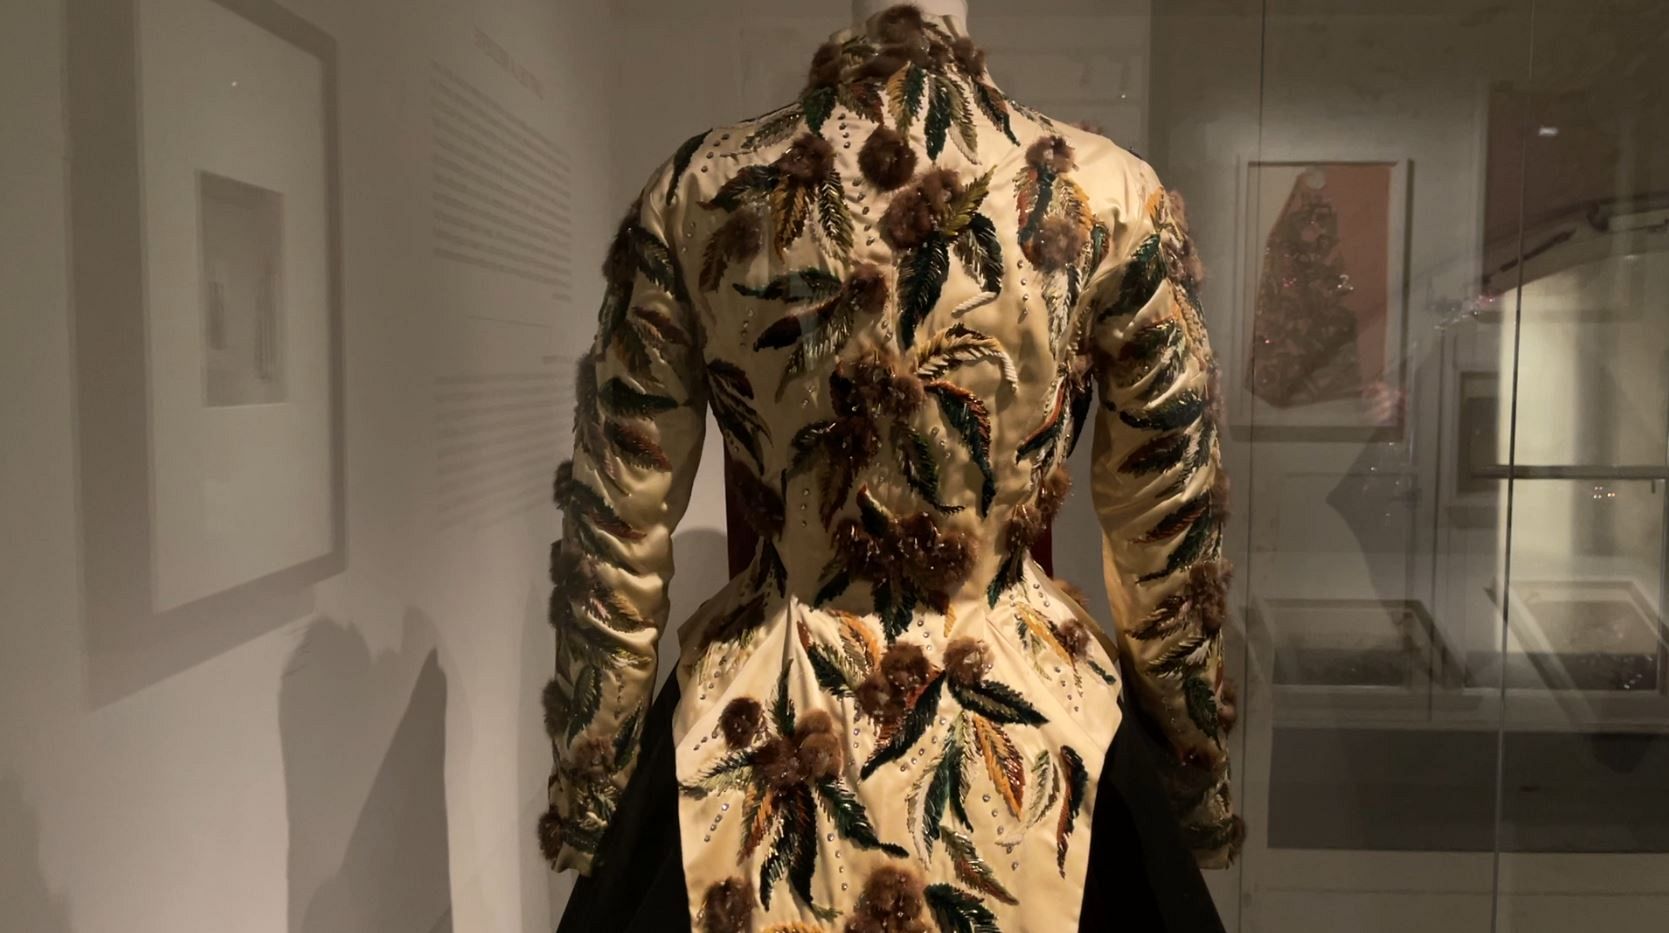 The embroidery in this jacket is attributed to Hubert de Givenchy